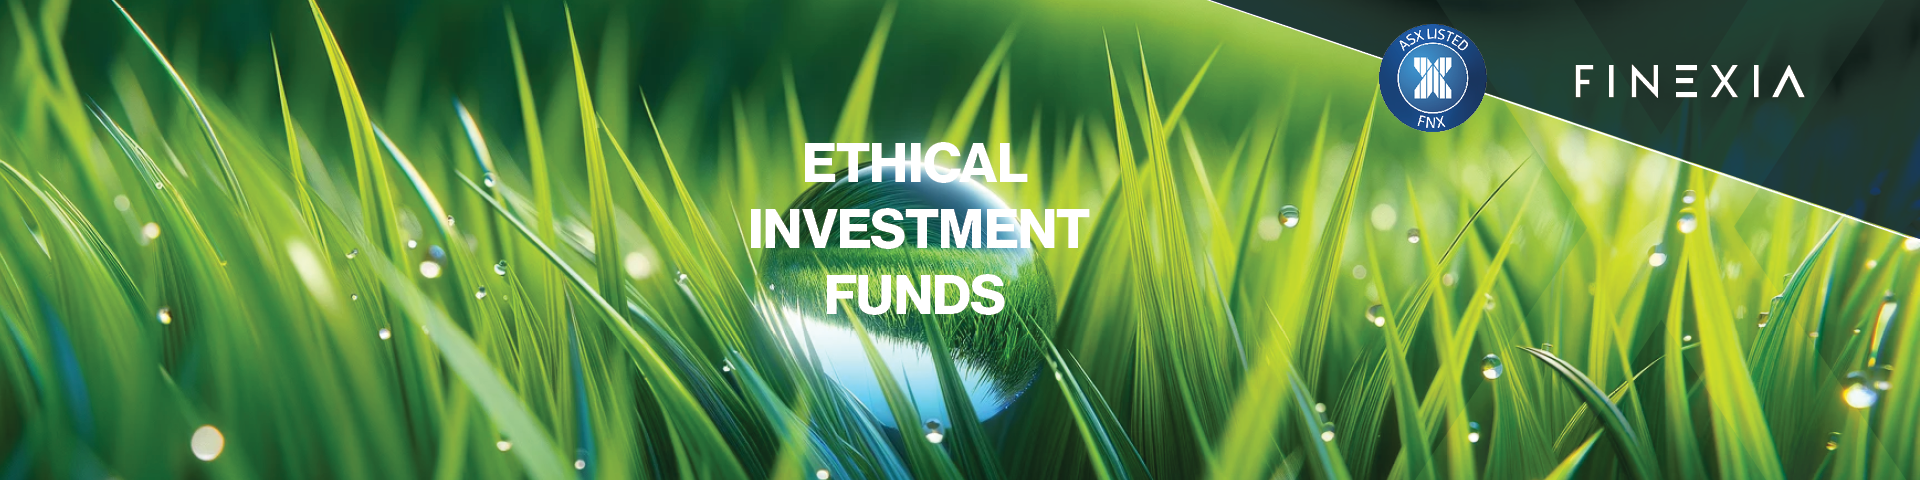 Ethical Investment Funds: Harnessing Financial Power for Good